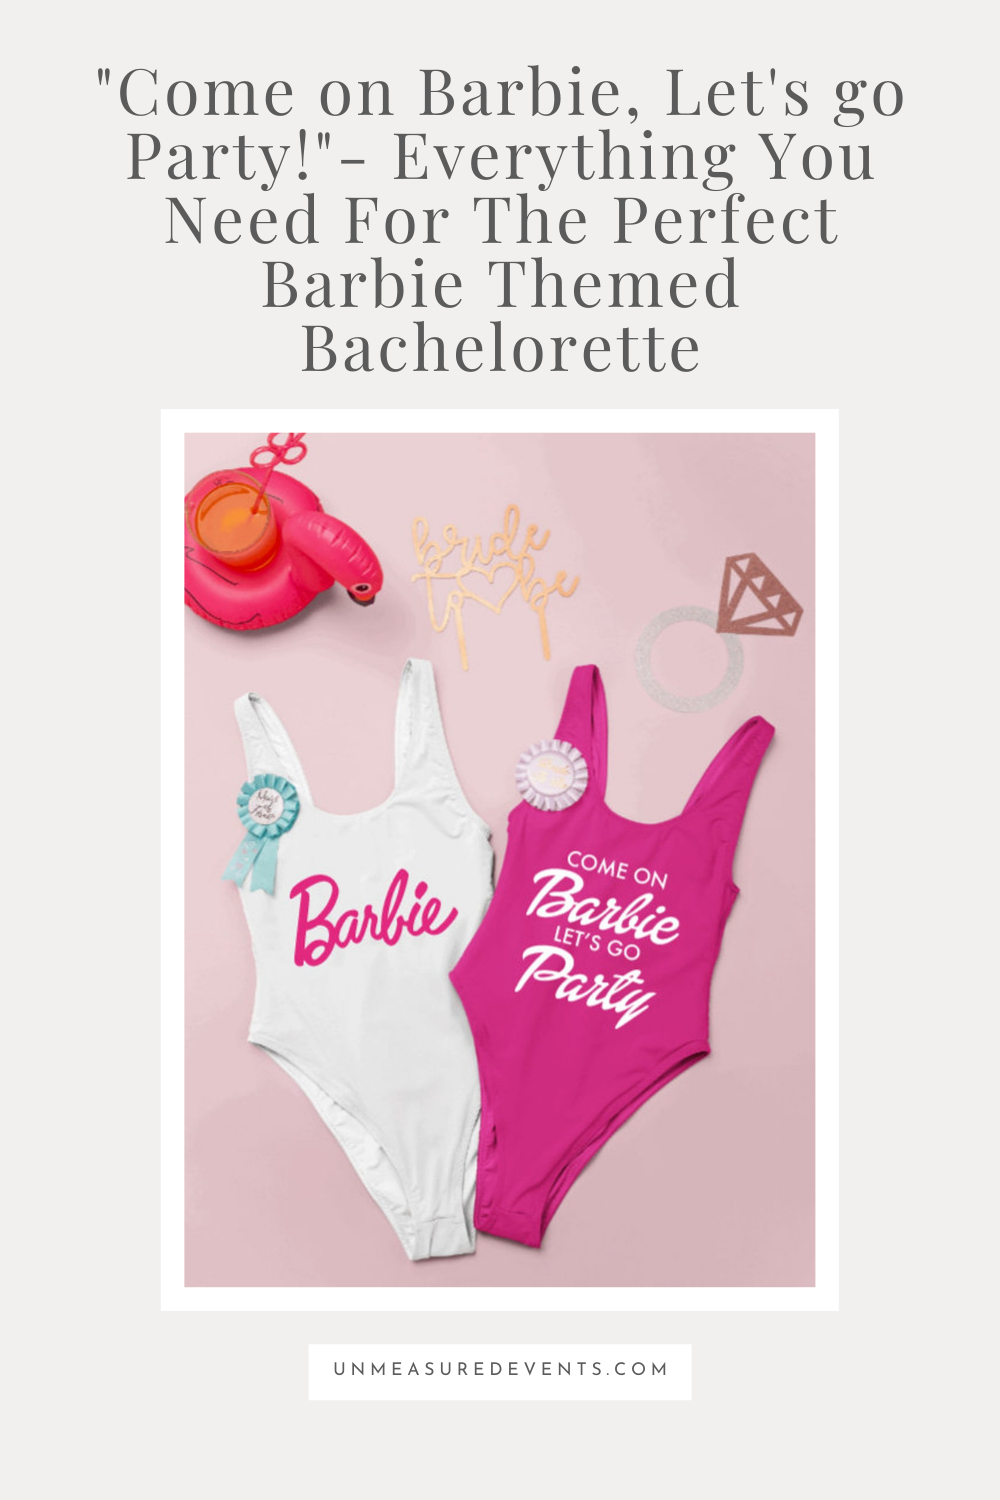 "Come on Barbie, Let's go Party!"- Everything You Need For The Perfect Barbie Themed Bachelorette